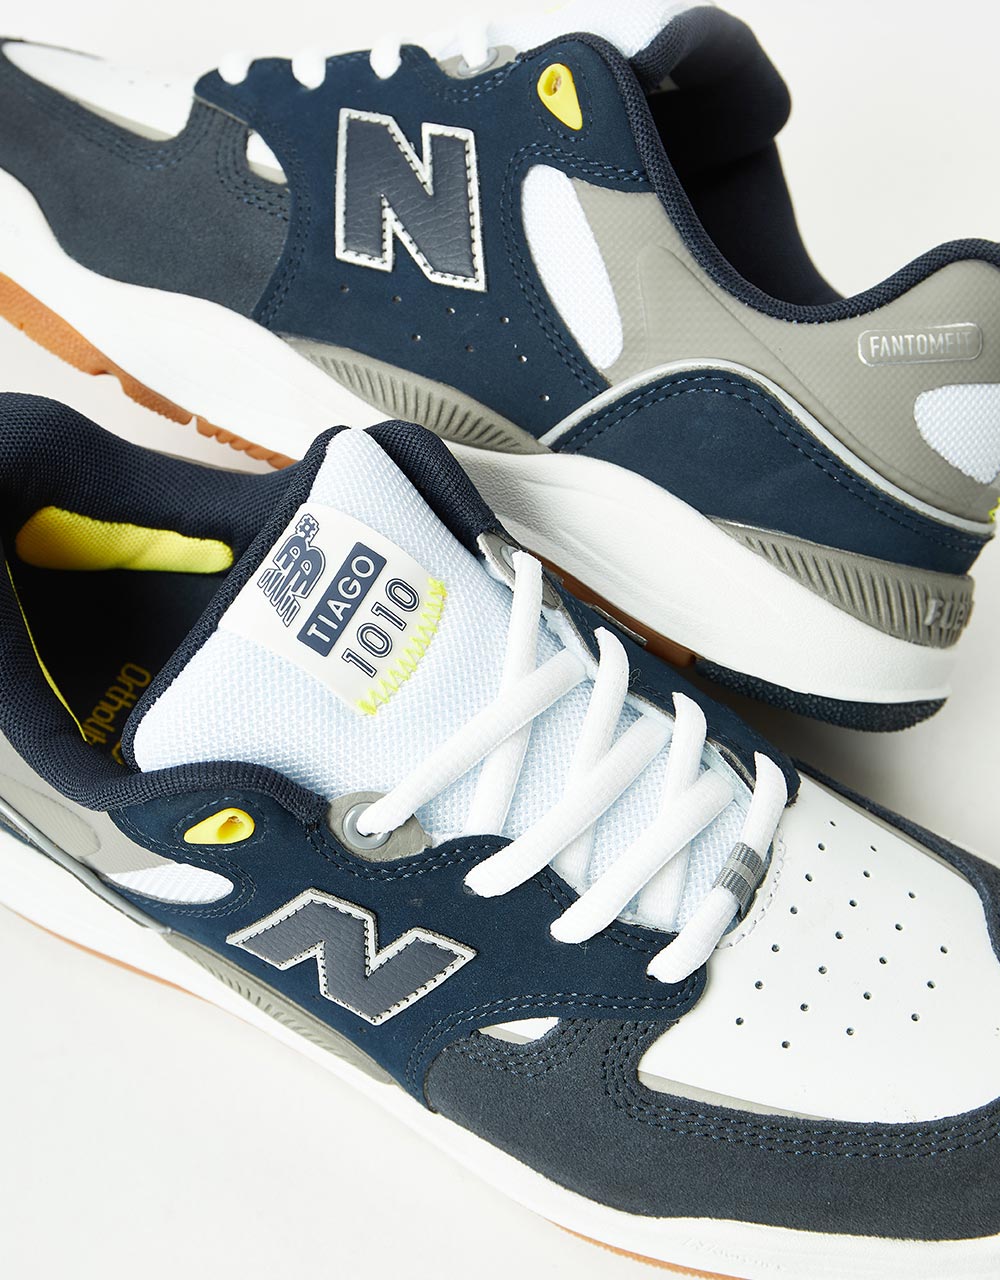 New Balance Numeric 1010 Skate Shoes - Navy/Yellow